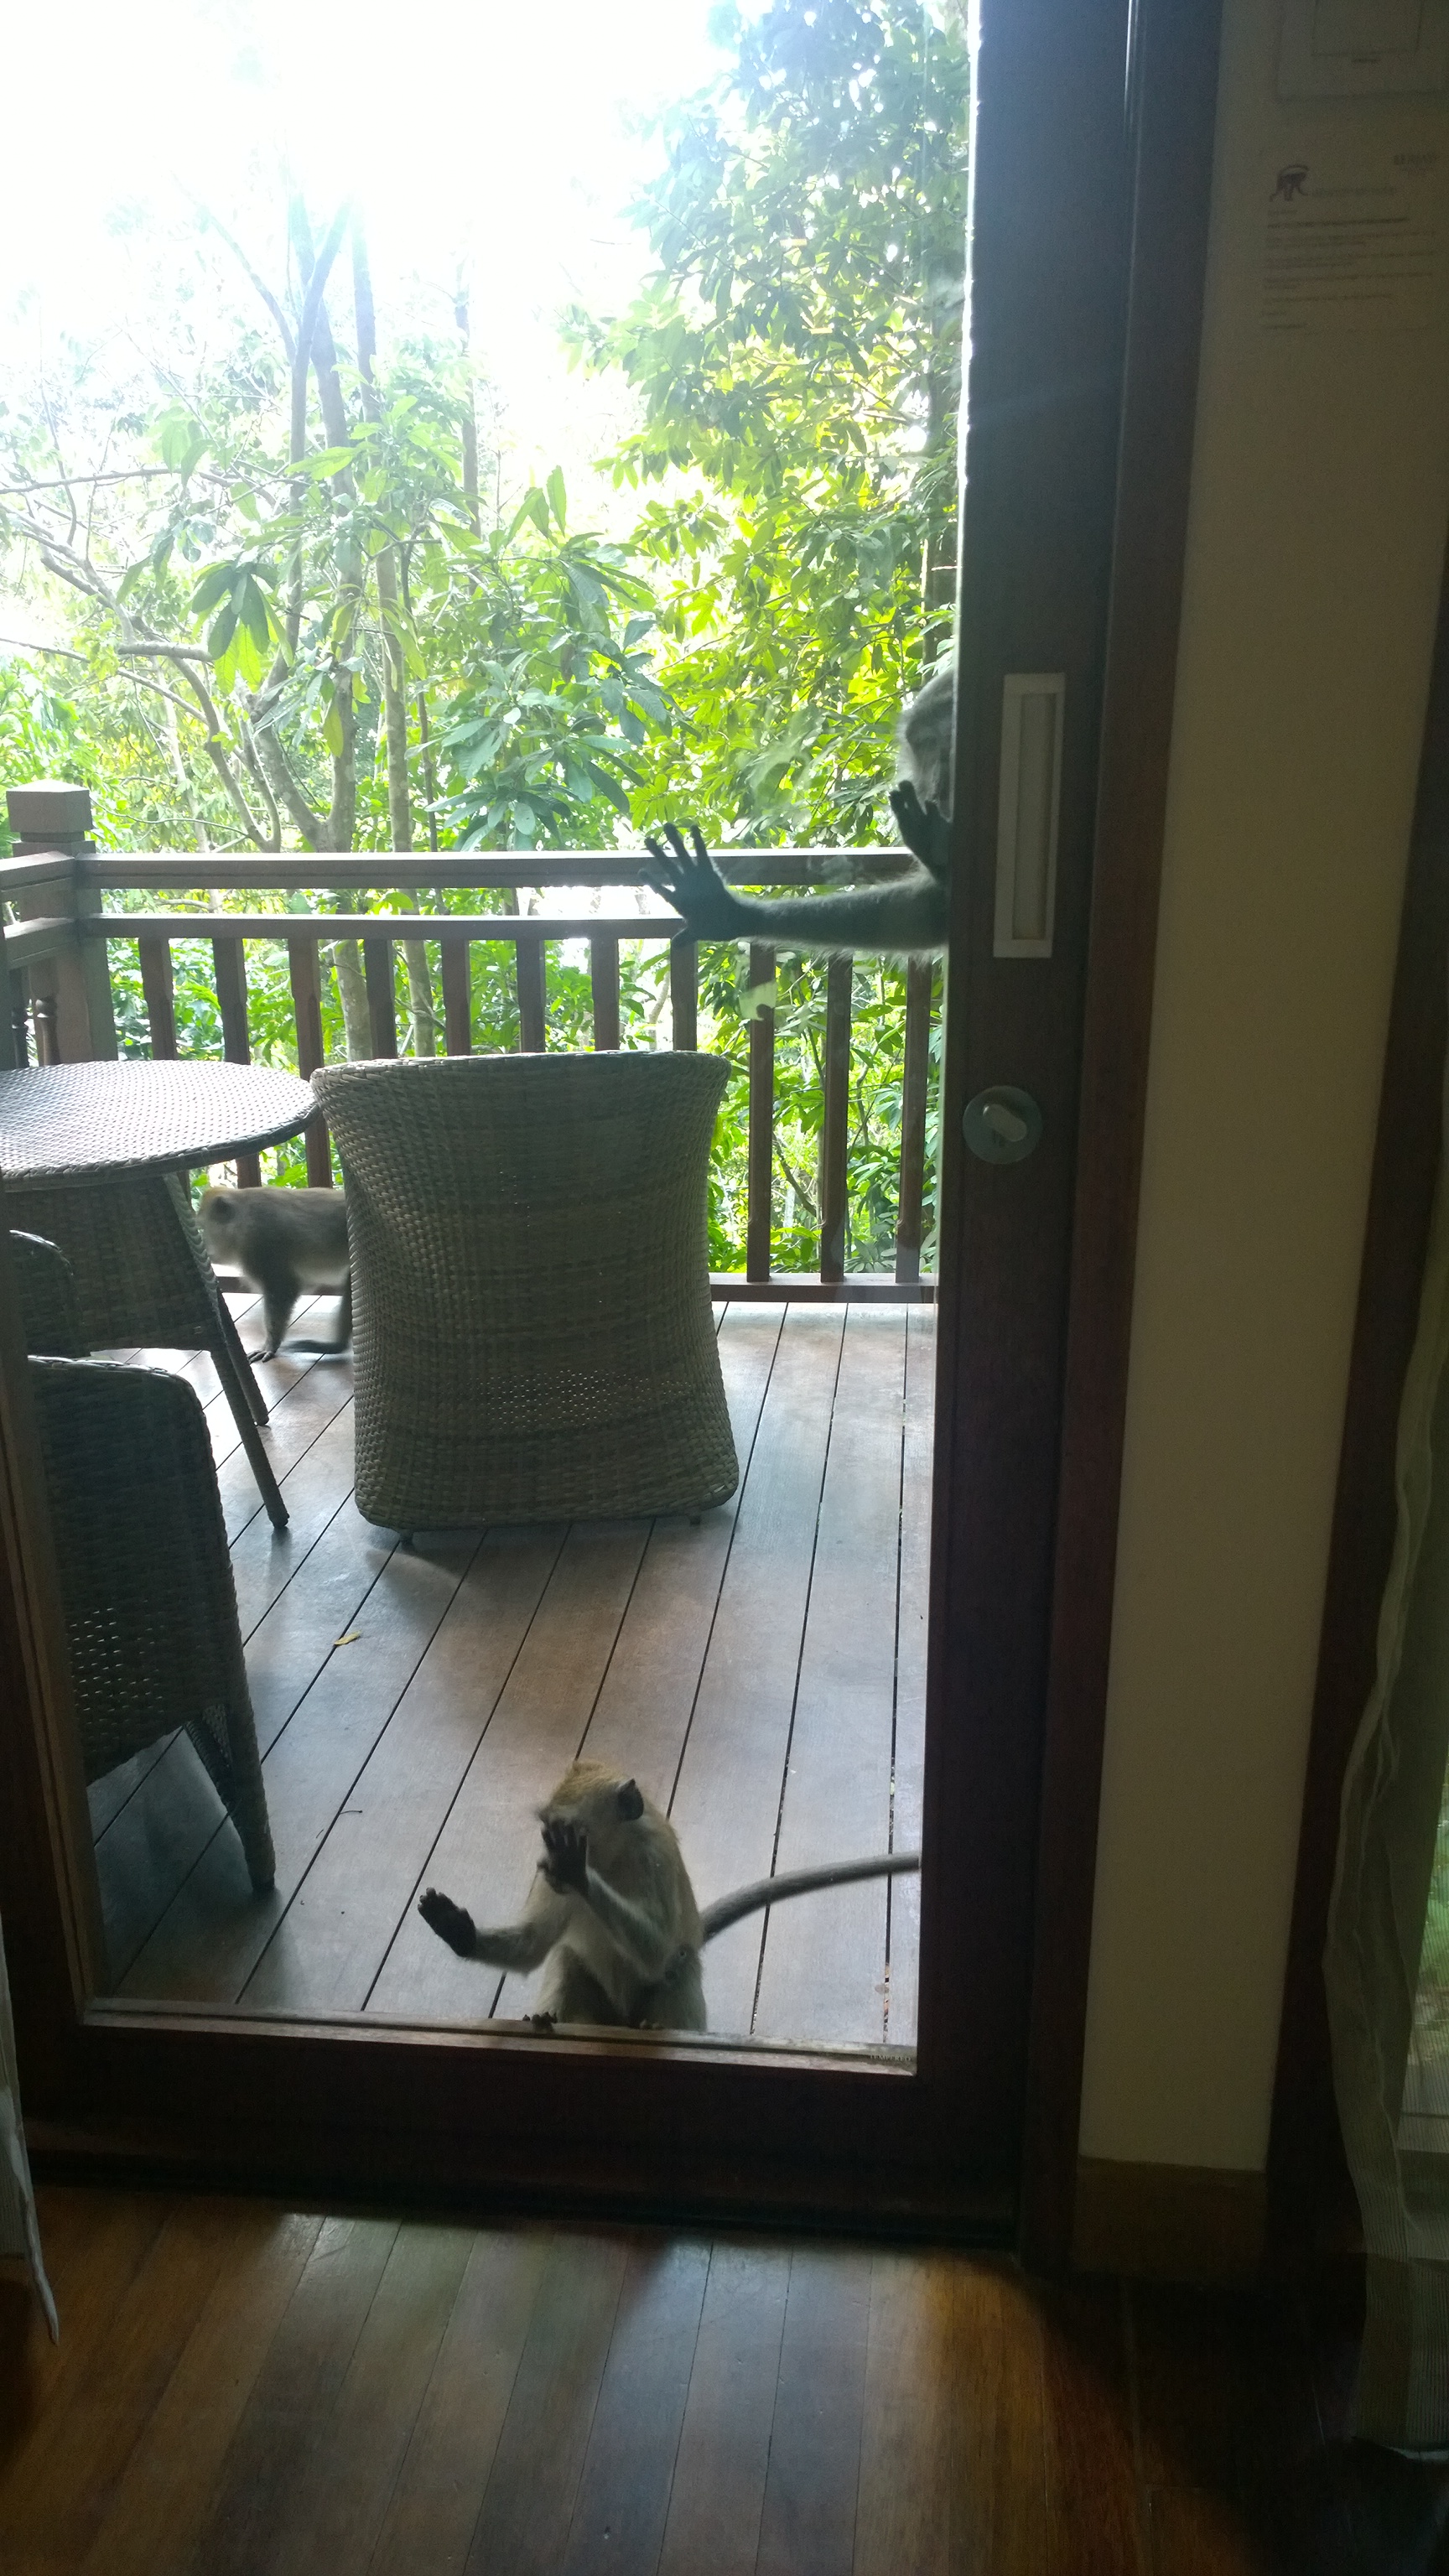 Two macaques on my hotel room balcony with their palms on the glass door trying to slide it open. Mischievous animals looking for food and things to play with.